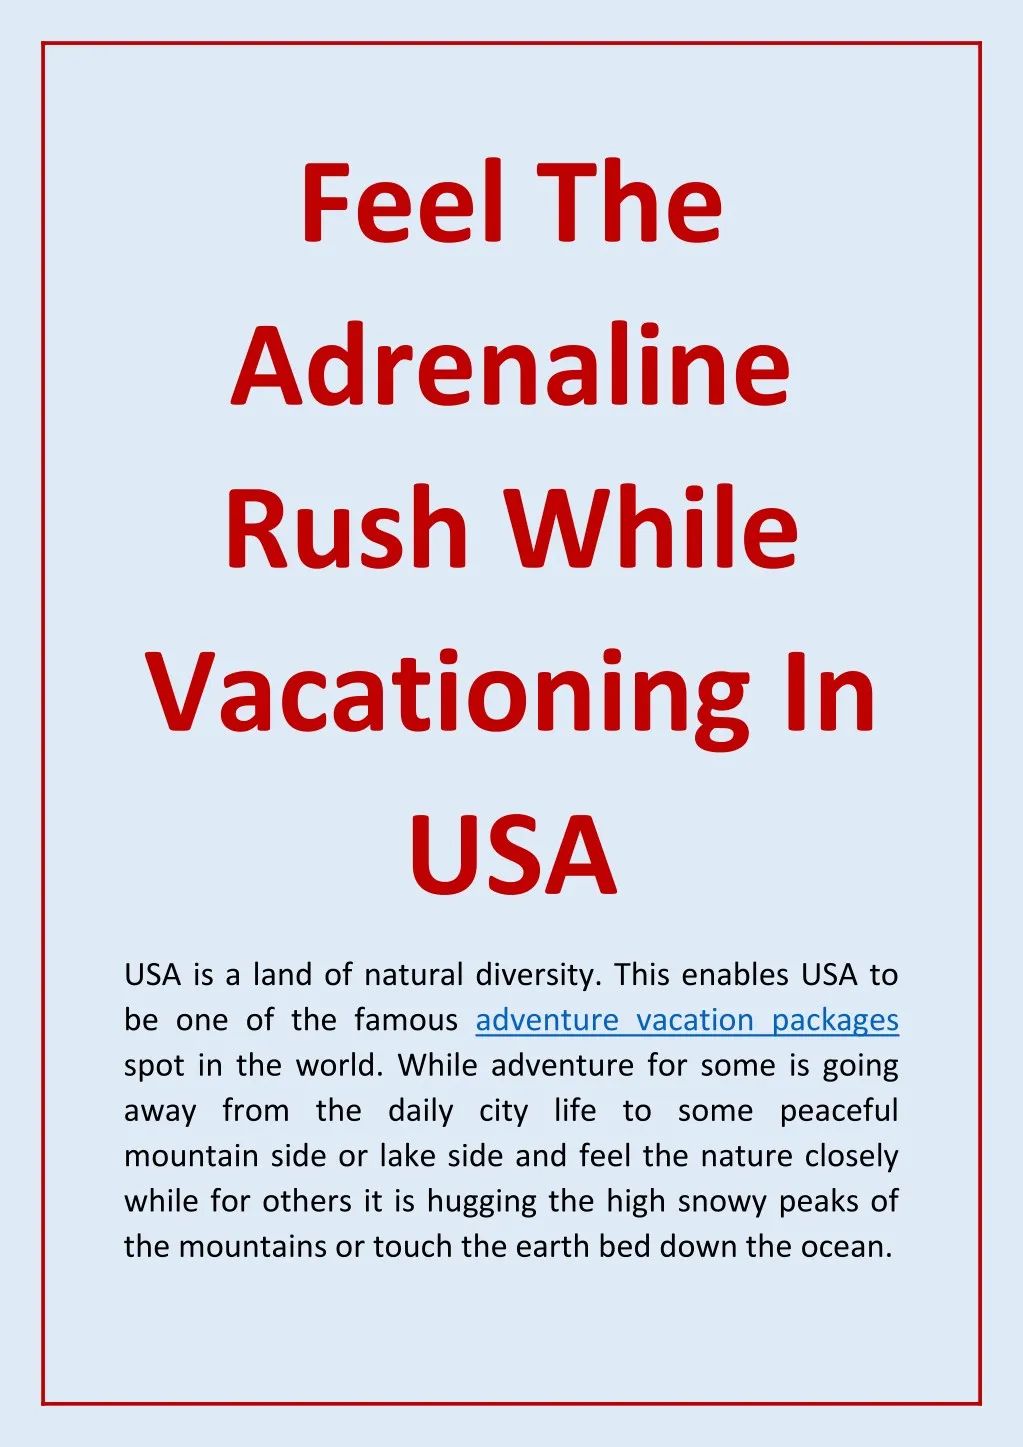 feel the adrenaline rush while vacationing in usa